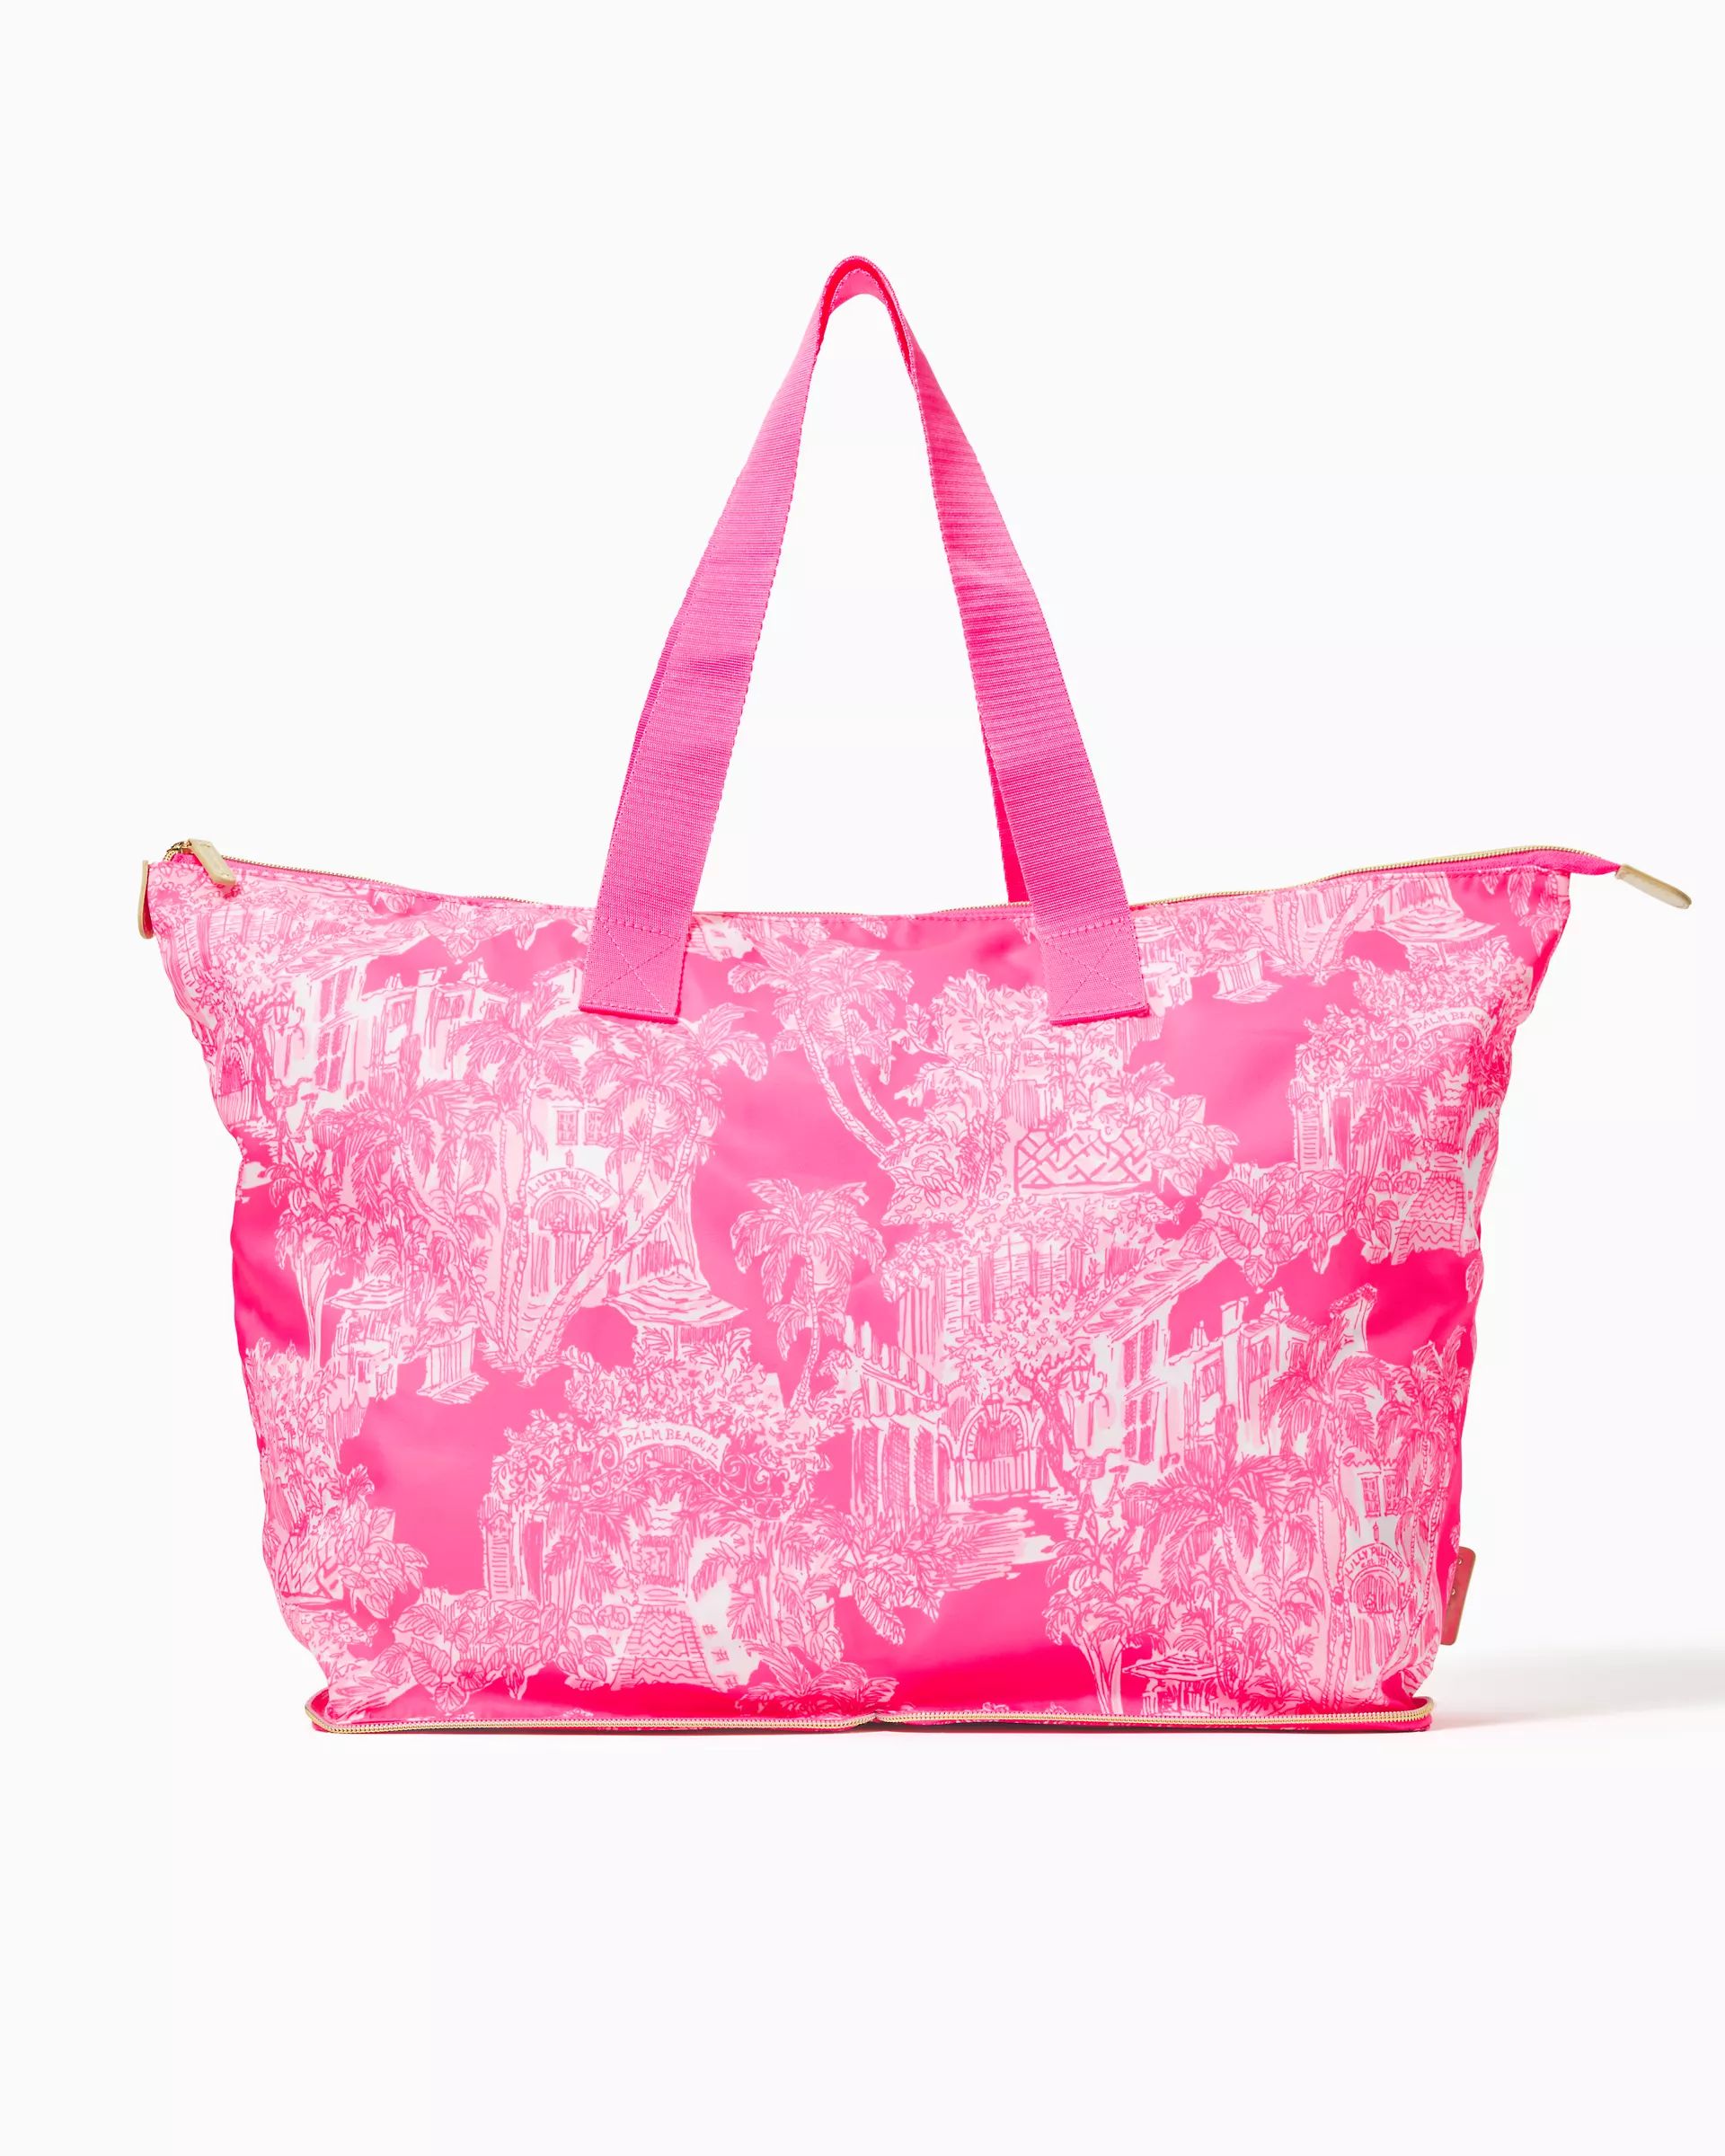 Getaway Packable Tote | Lilly Pulitzer | Lilly Pulitzer